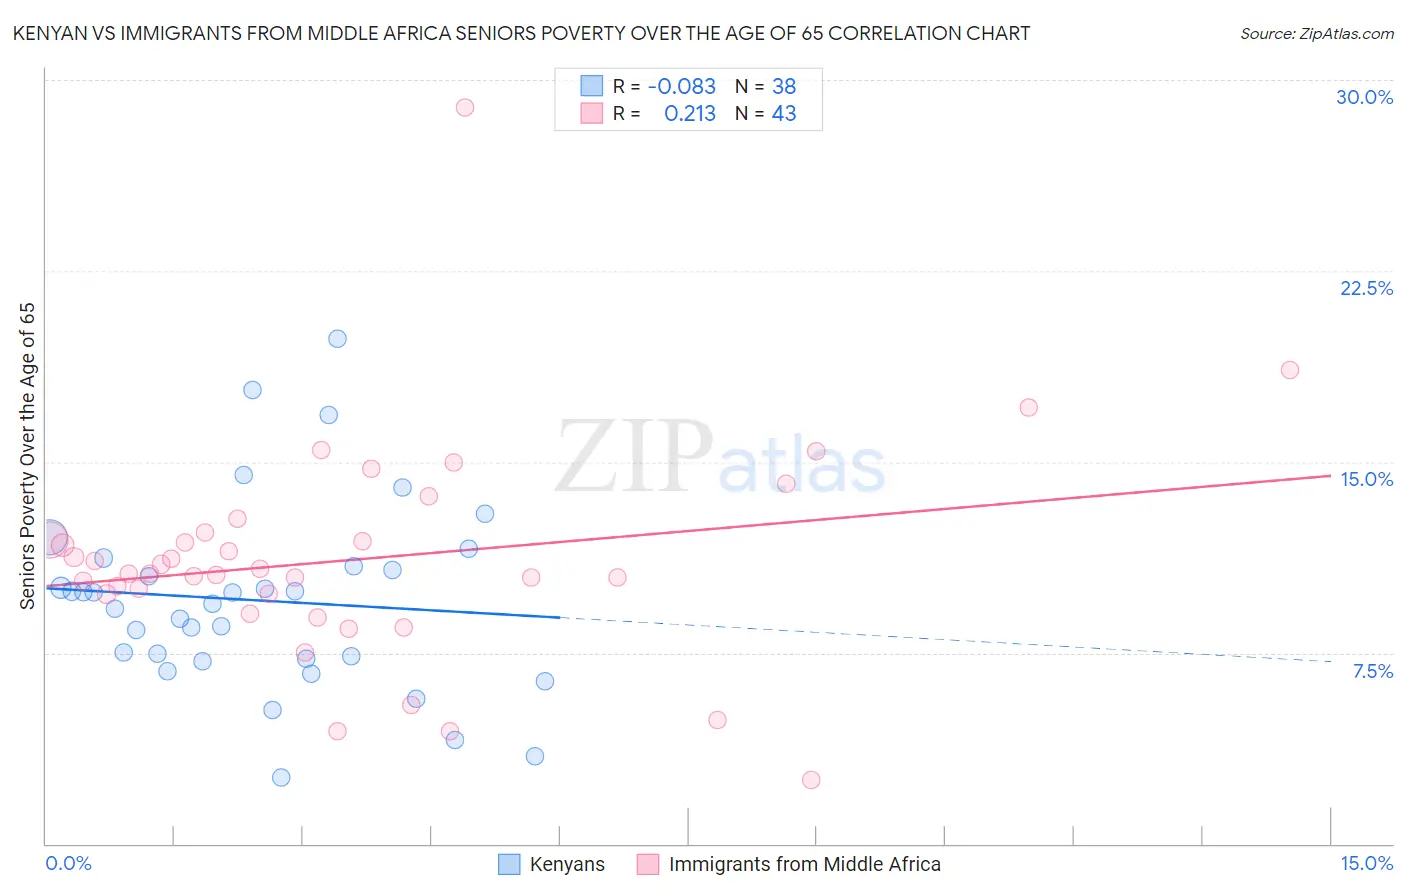 Kenyan vs Immigrants from Middle Africa Seniors Poverty Over the Age of 65